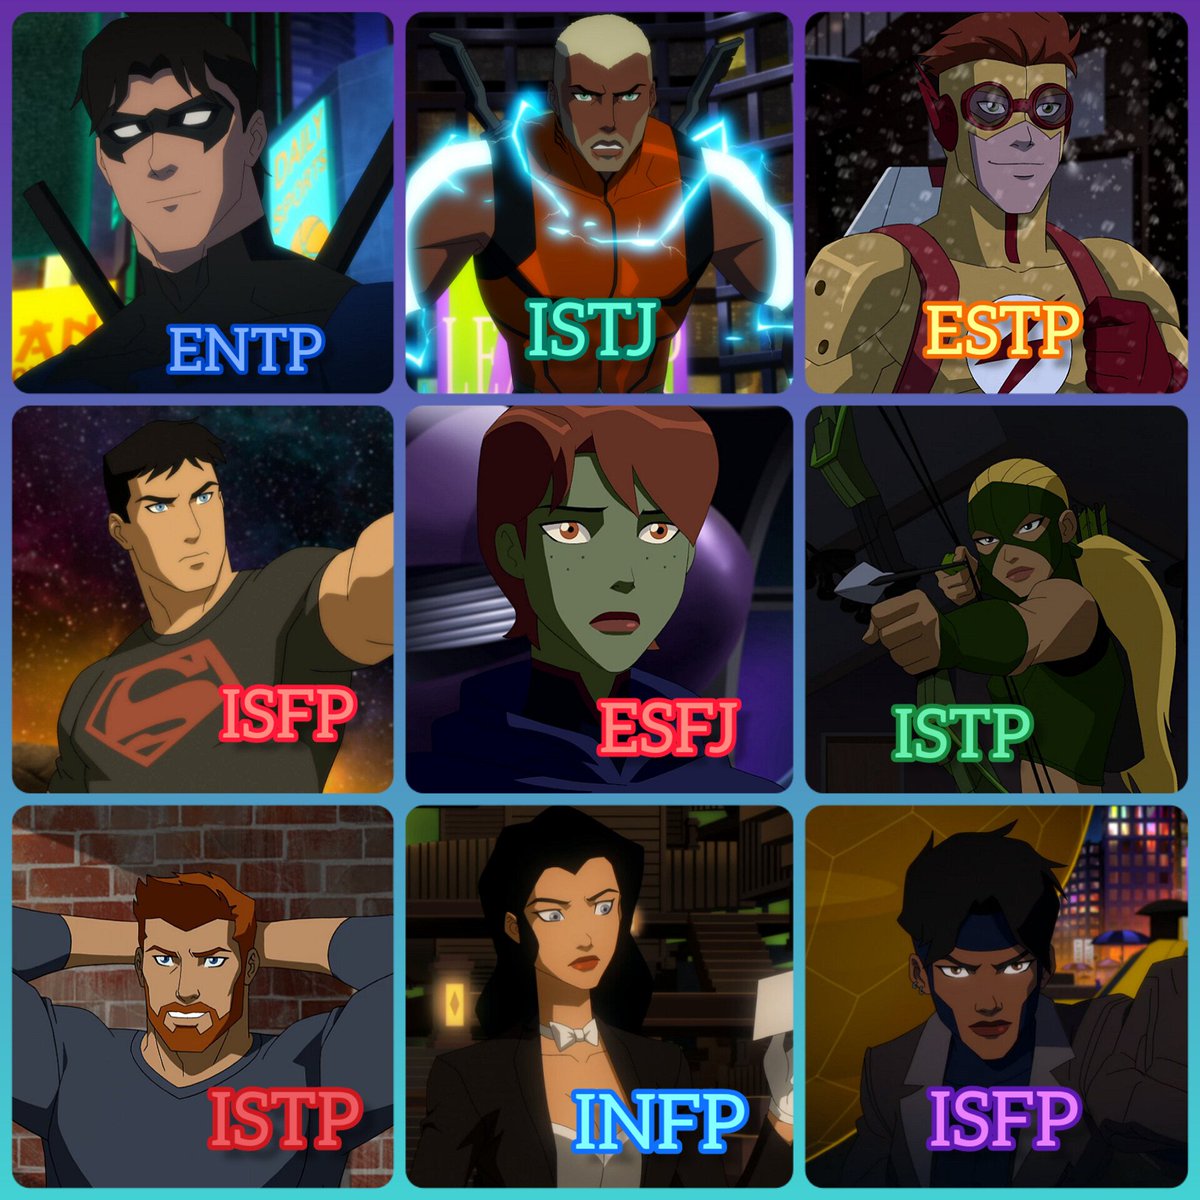 YJ og members of the team #mbti types
Which one is your type ?

#RenewYoungJustice 
#YoungJustice
#YoungJusticePhantoms 
#KeepBingingYJ
#SaveEarth16 
#MoreYoungJustice